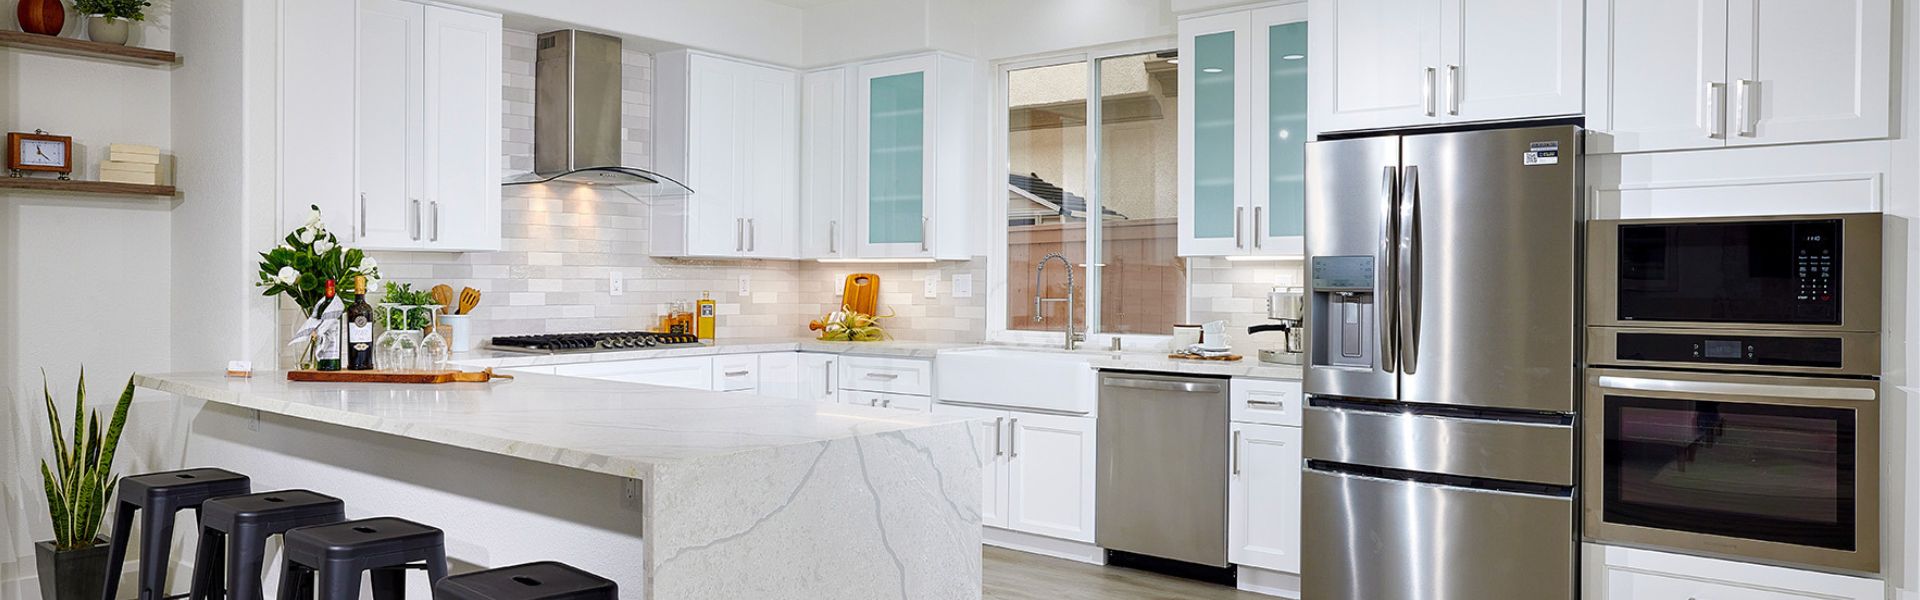 wholesale cabinets san diego